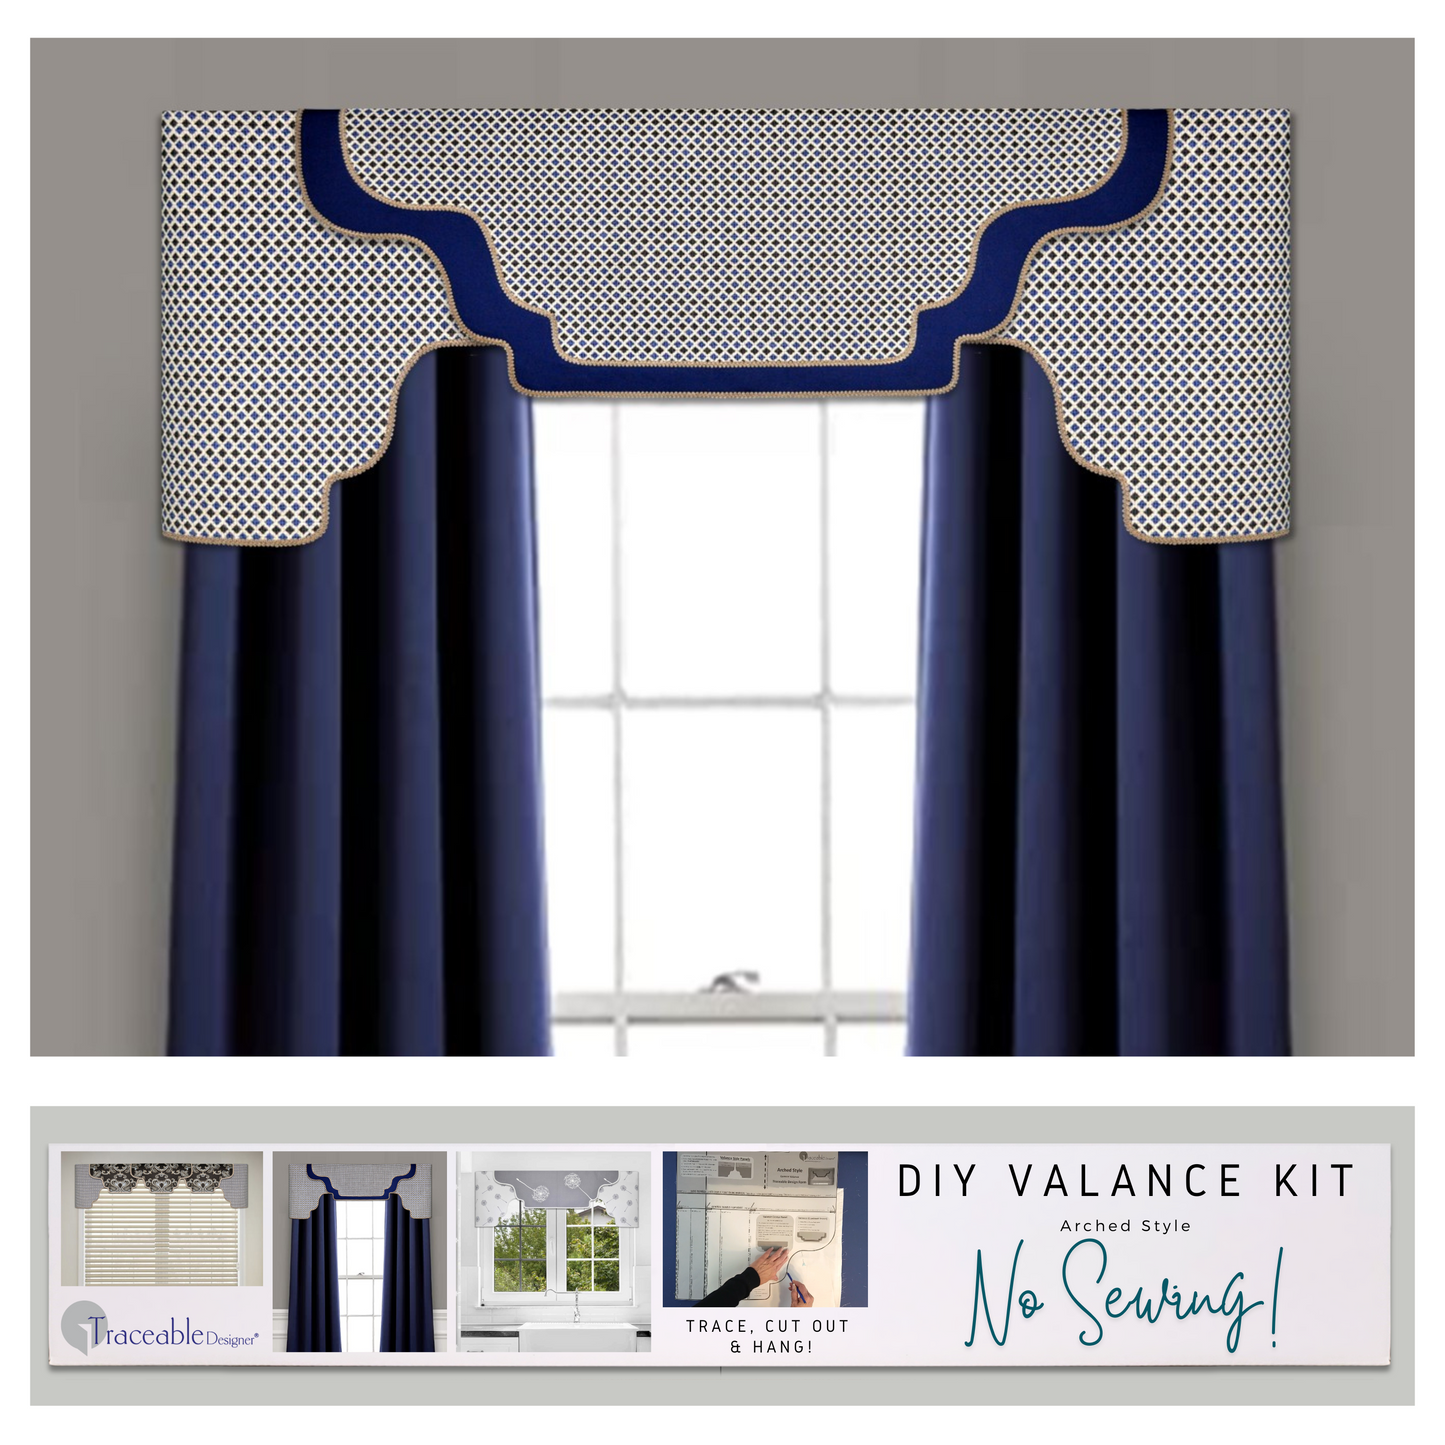 Traceable Designer arched style no-sew cornice valance kit inlcudes traceable valance design forms used to make custom valances without sewing. Use a 2.5" wide pocket curtain rod.